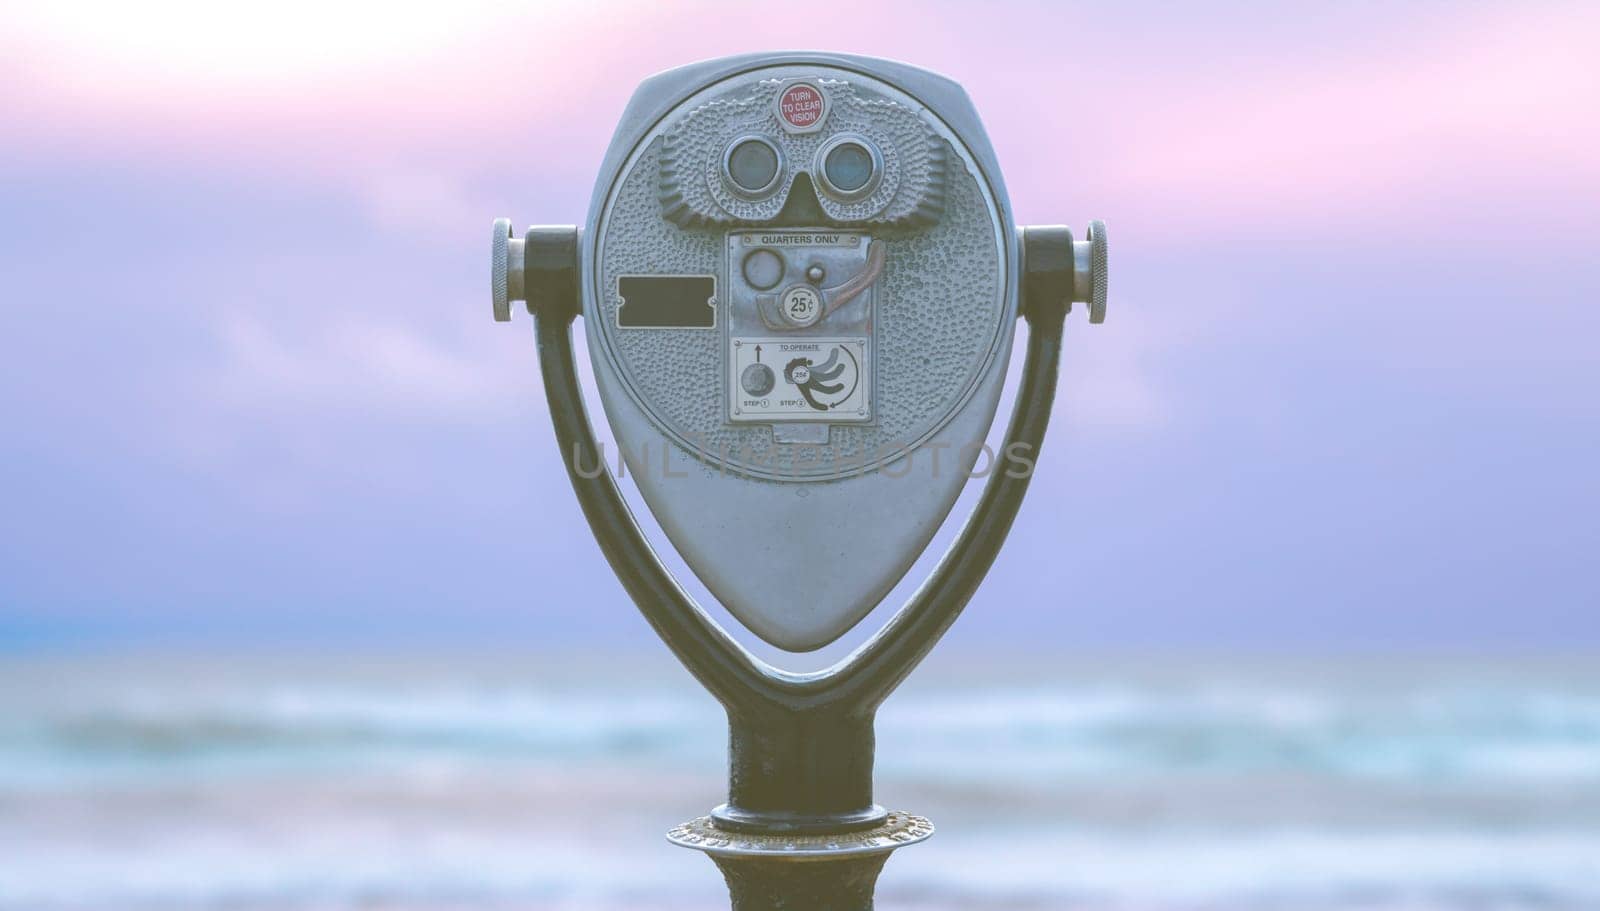 A Tower Viewer At A Beach At Dusk by mrdoomits